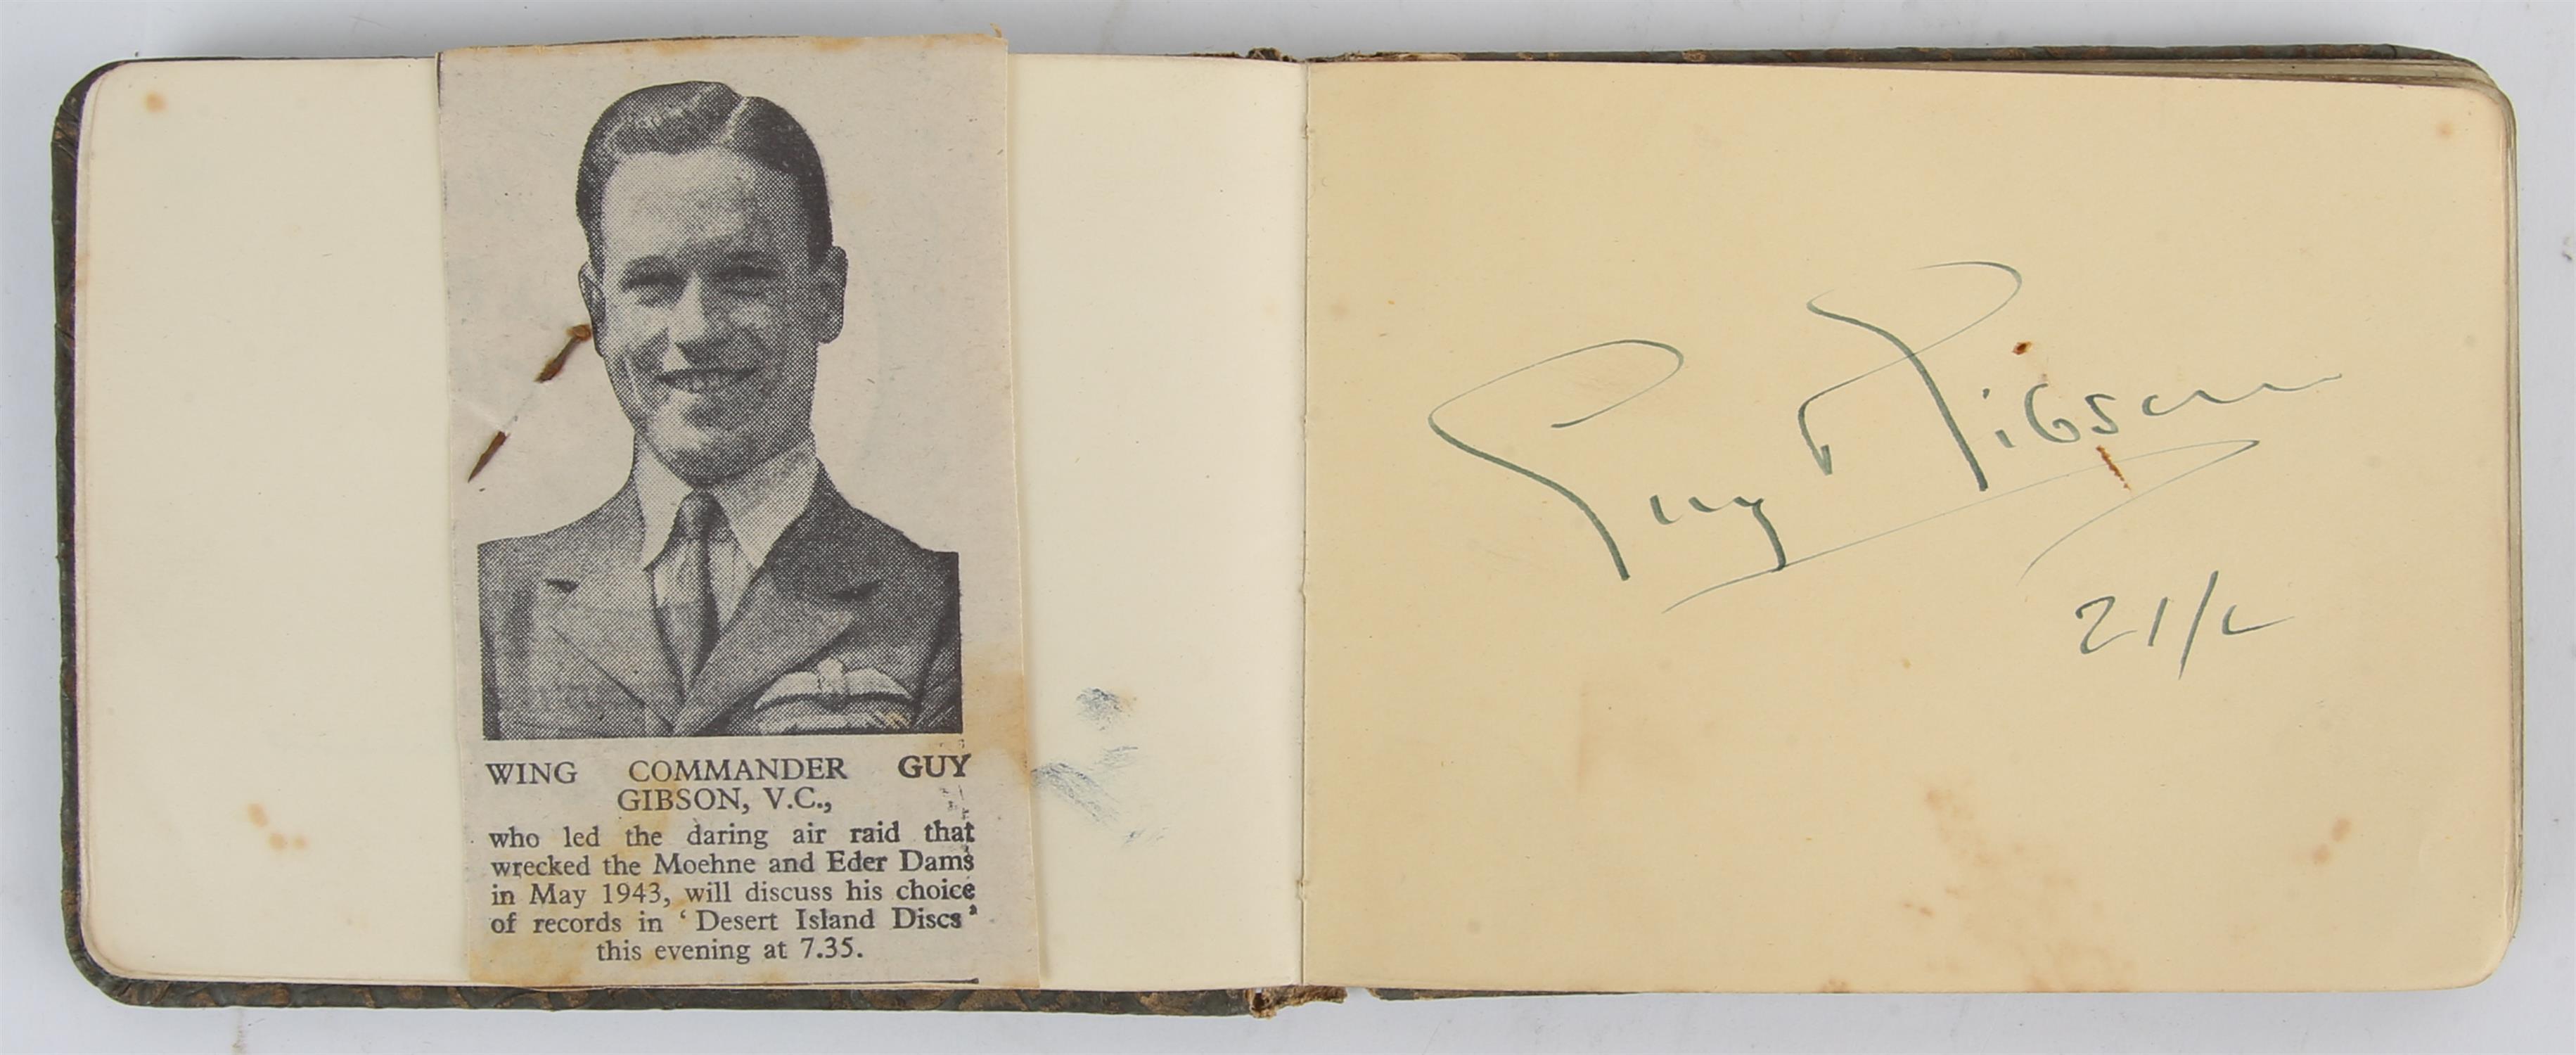 Royal Airforce: Autograph Album signed by Guy Gibson, James Edgar ‘Johnnie’ Johnson and other - Image 8 of 8